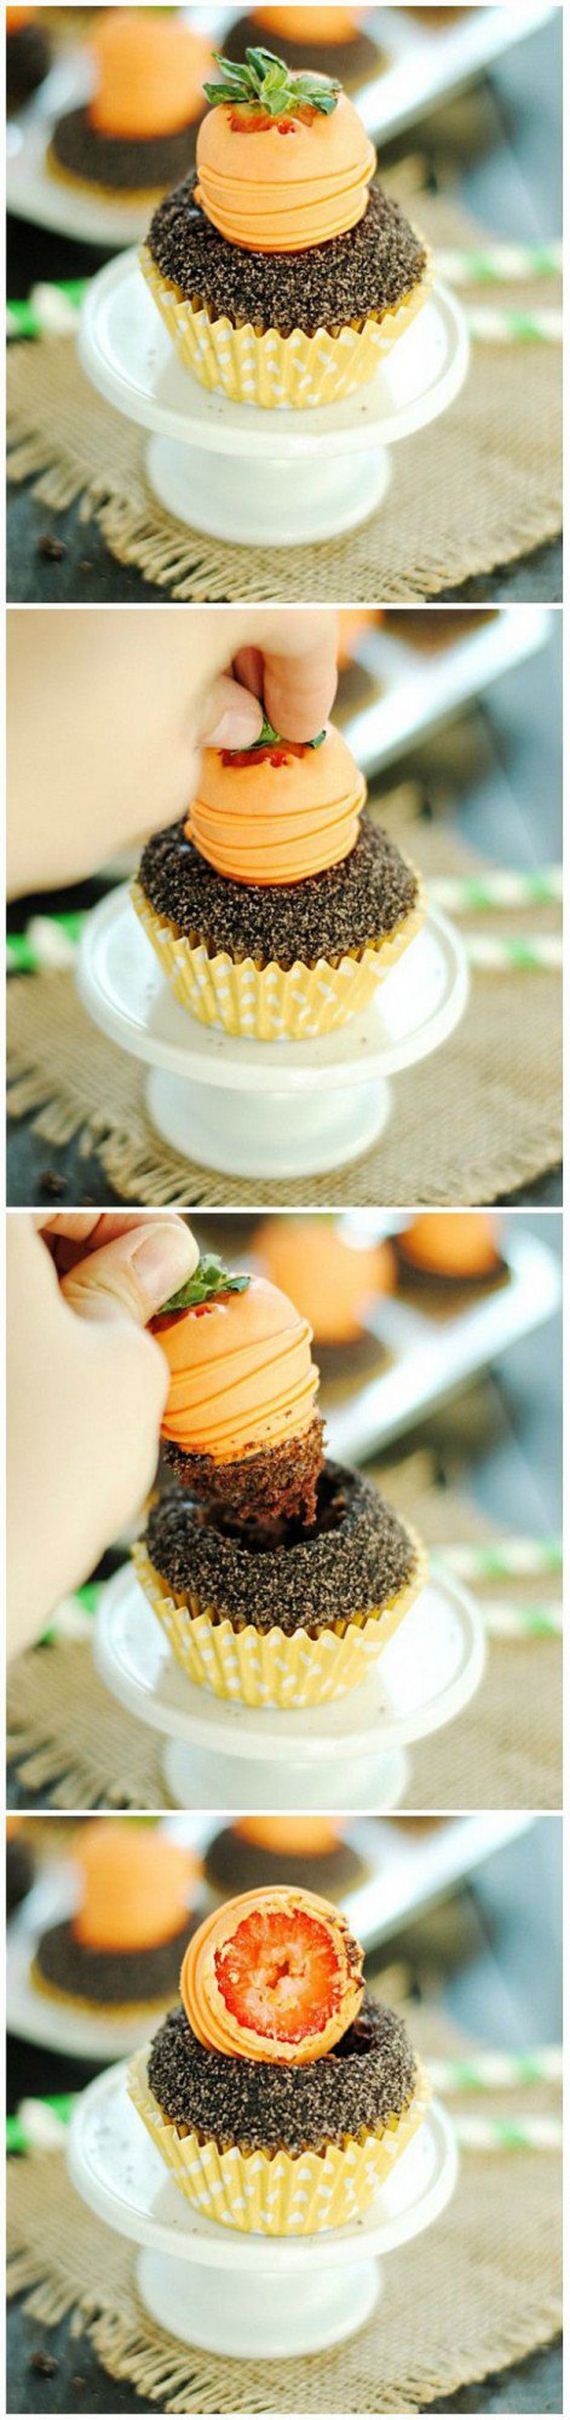 Carrots and Dirt Cupcakes.